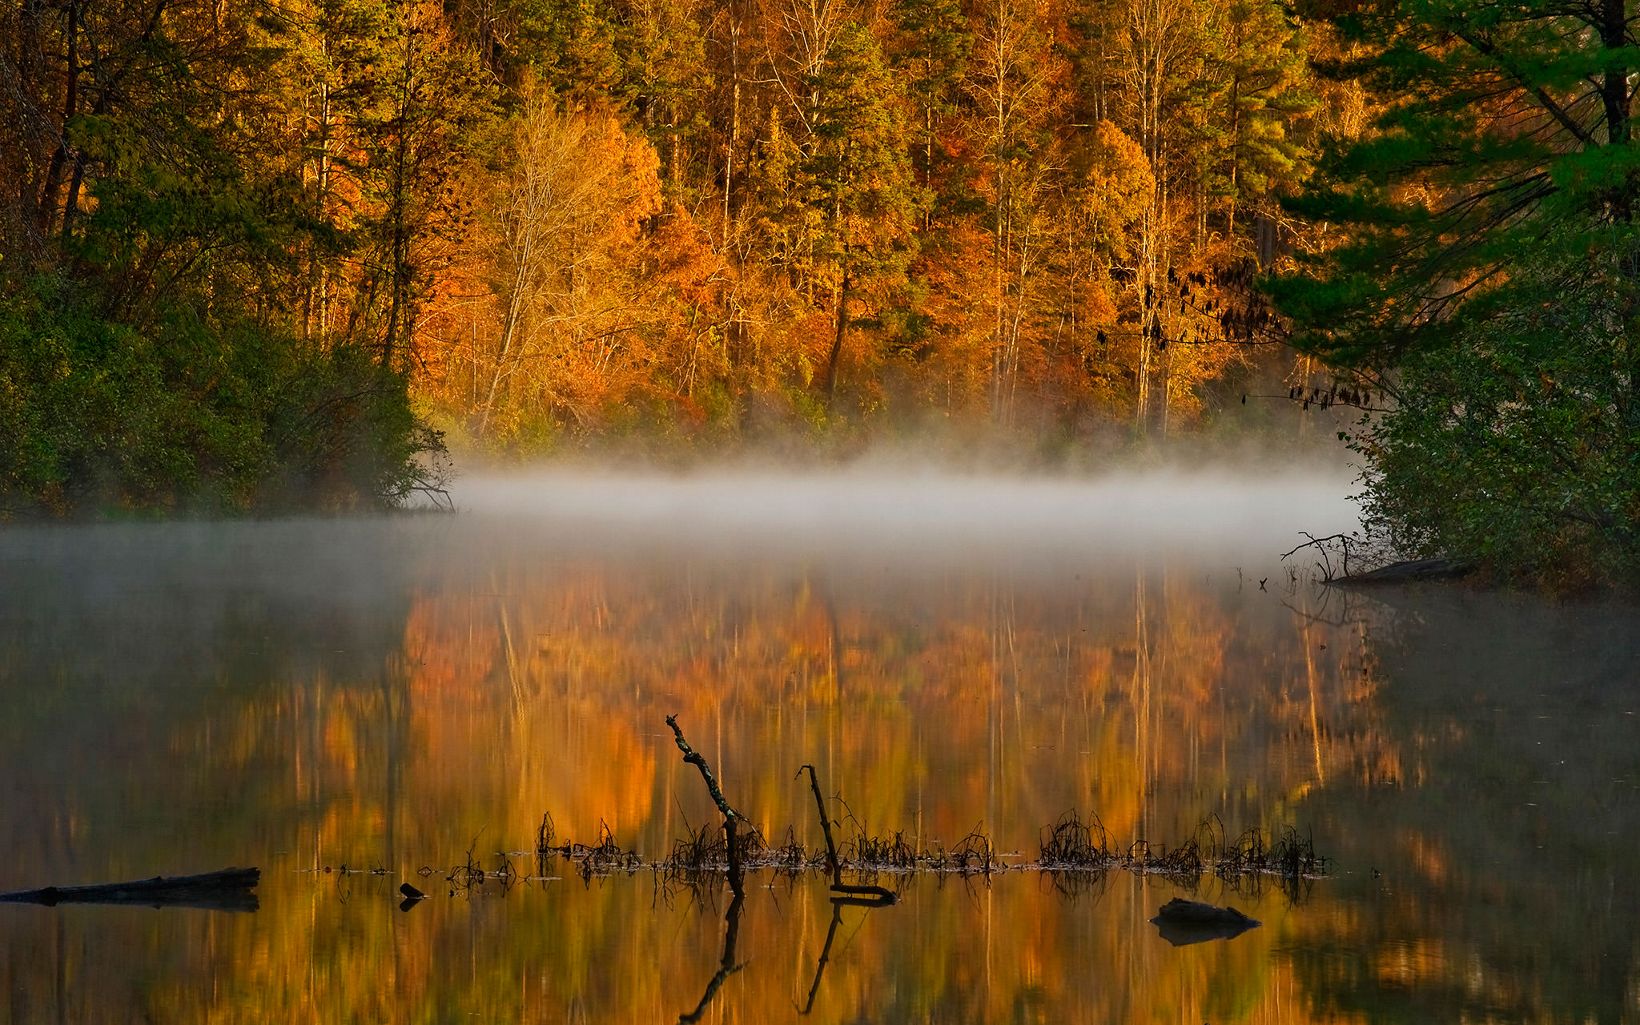 Orange and gold leaves are reflected in a calm, flat creek as white mist rises from the water in the early morning.